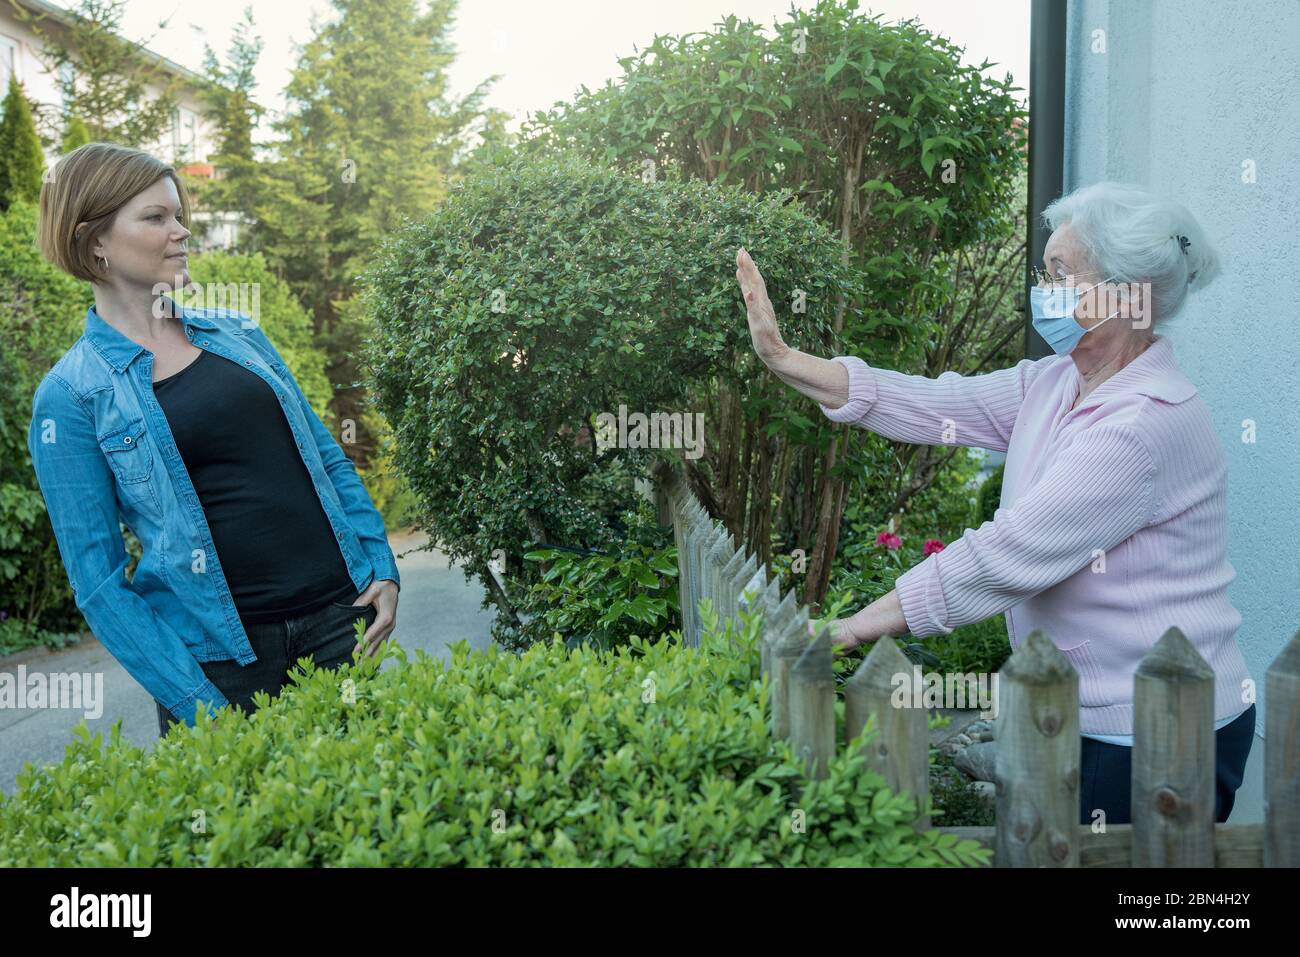 Senior woman with face mask shows safety distance to neighbor woman Stock Photo